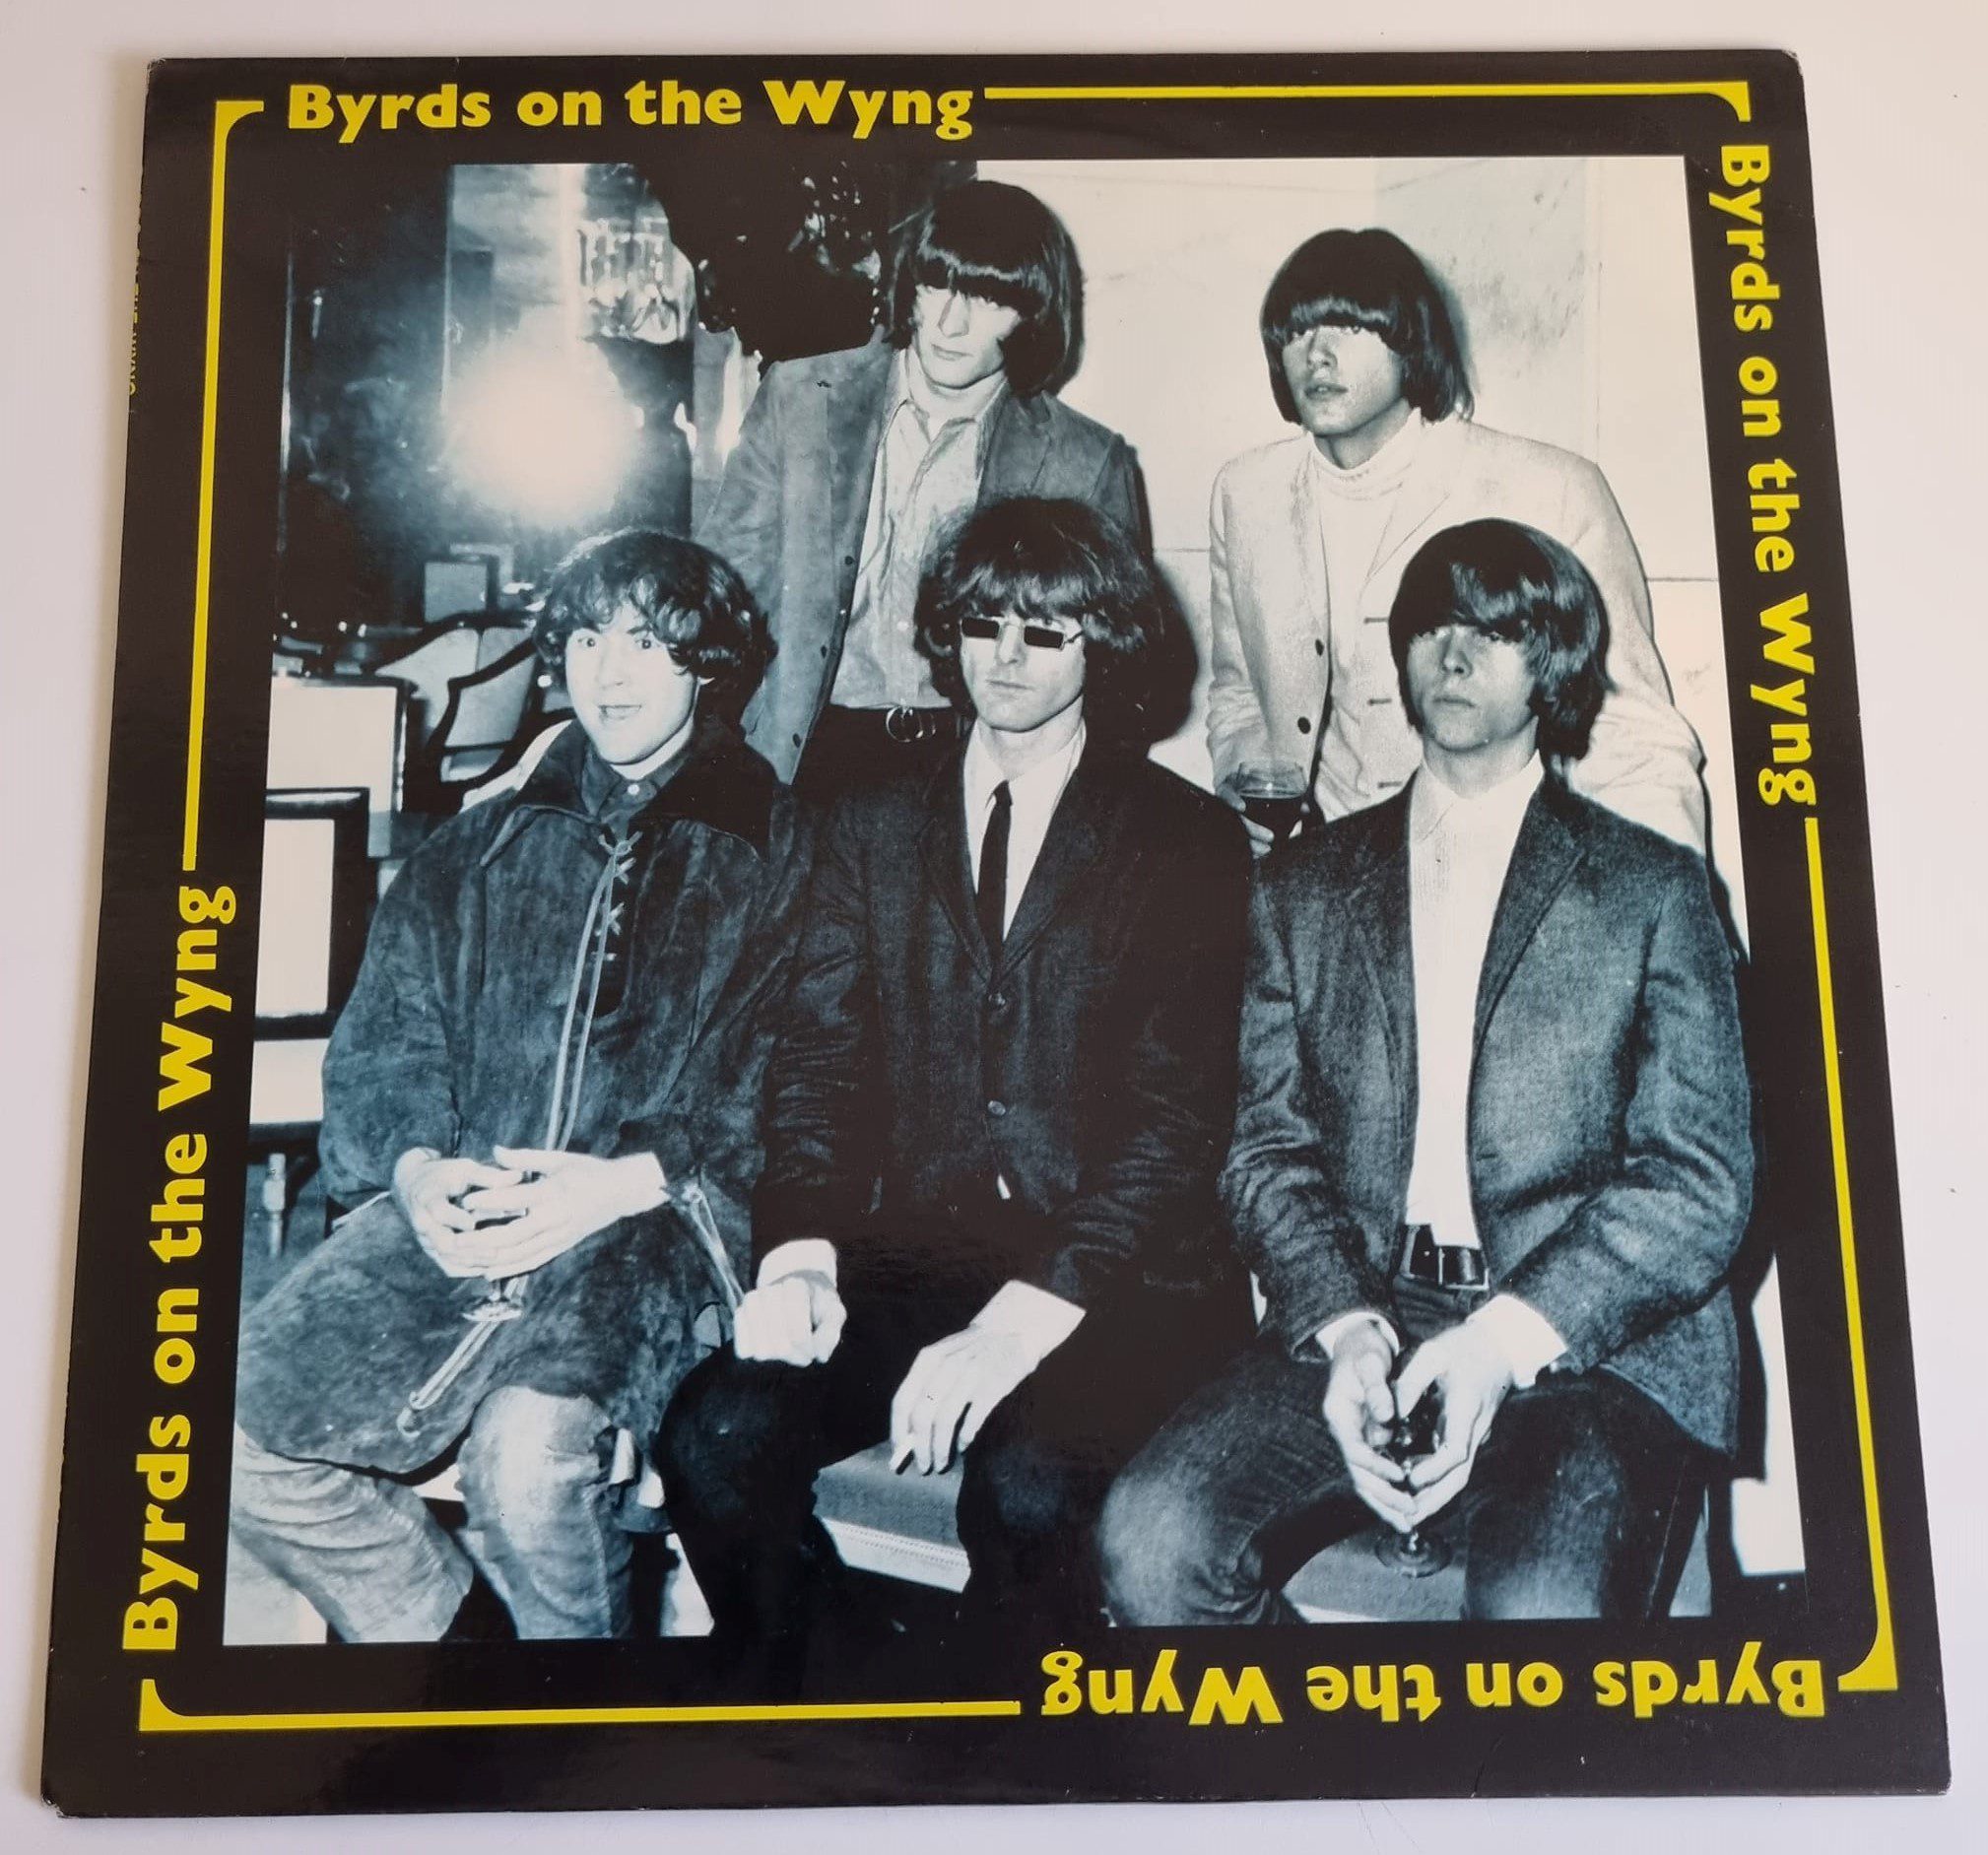 Buy this rare Byrds record by clicking here